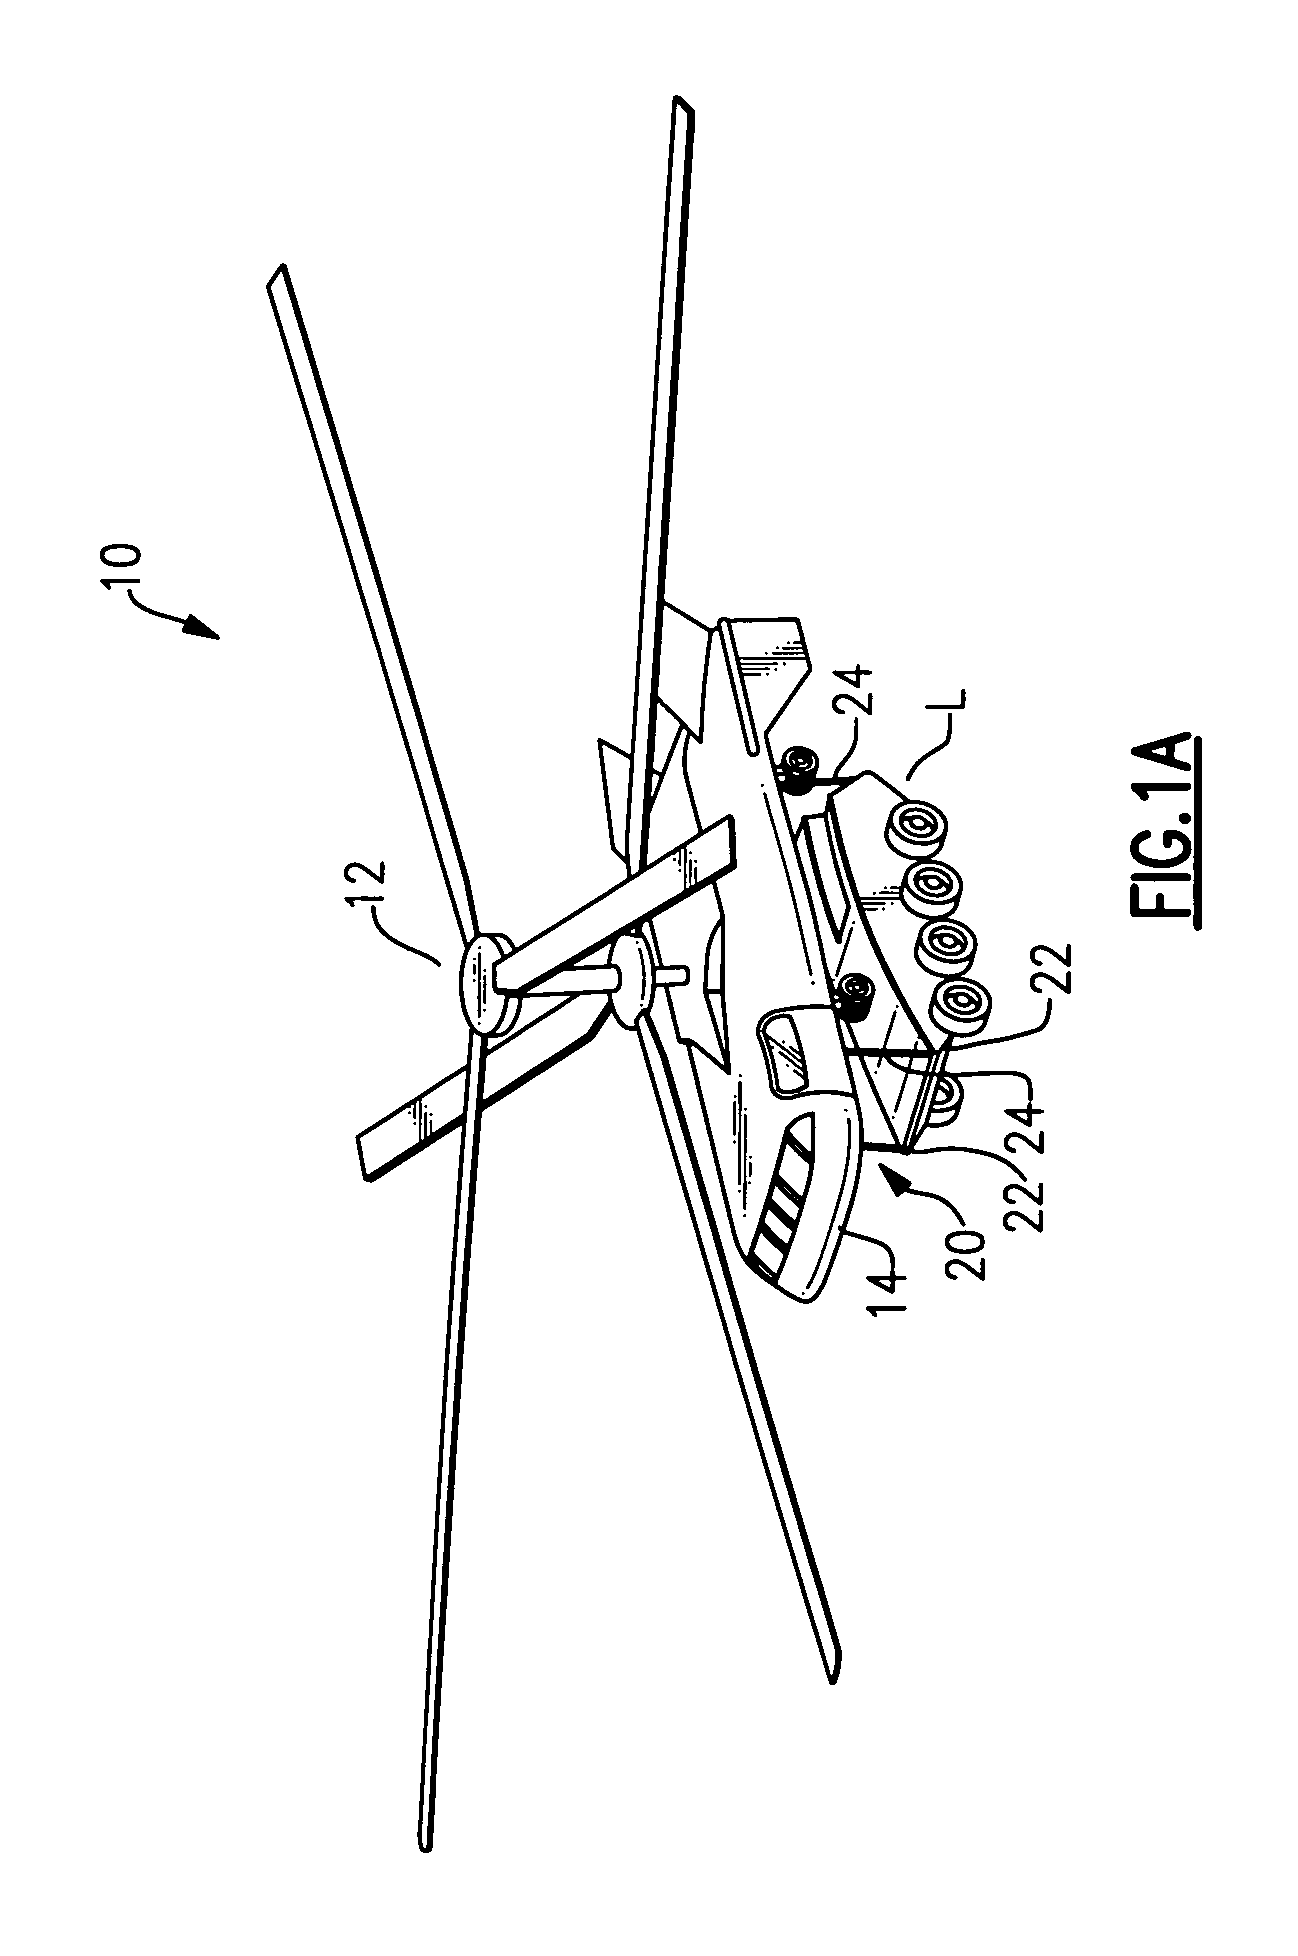 System and method for improved rotary-wing aircraft performance with interior/external loads